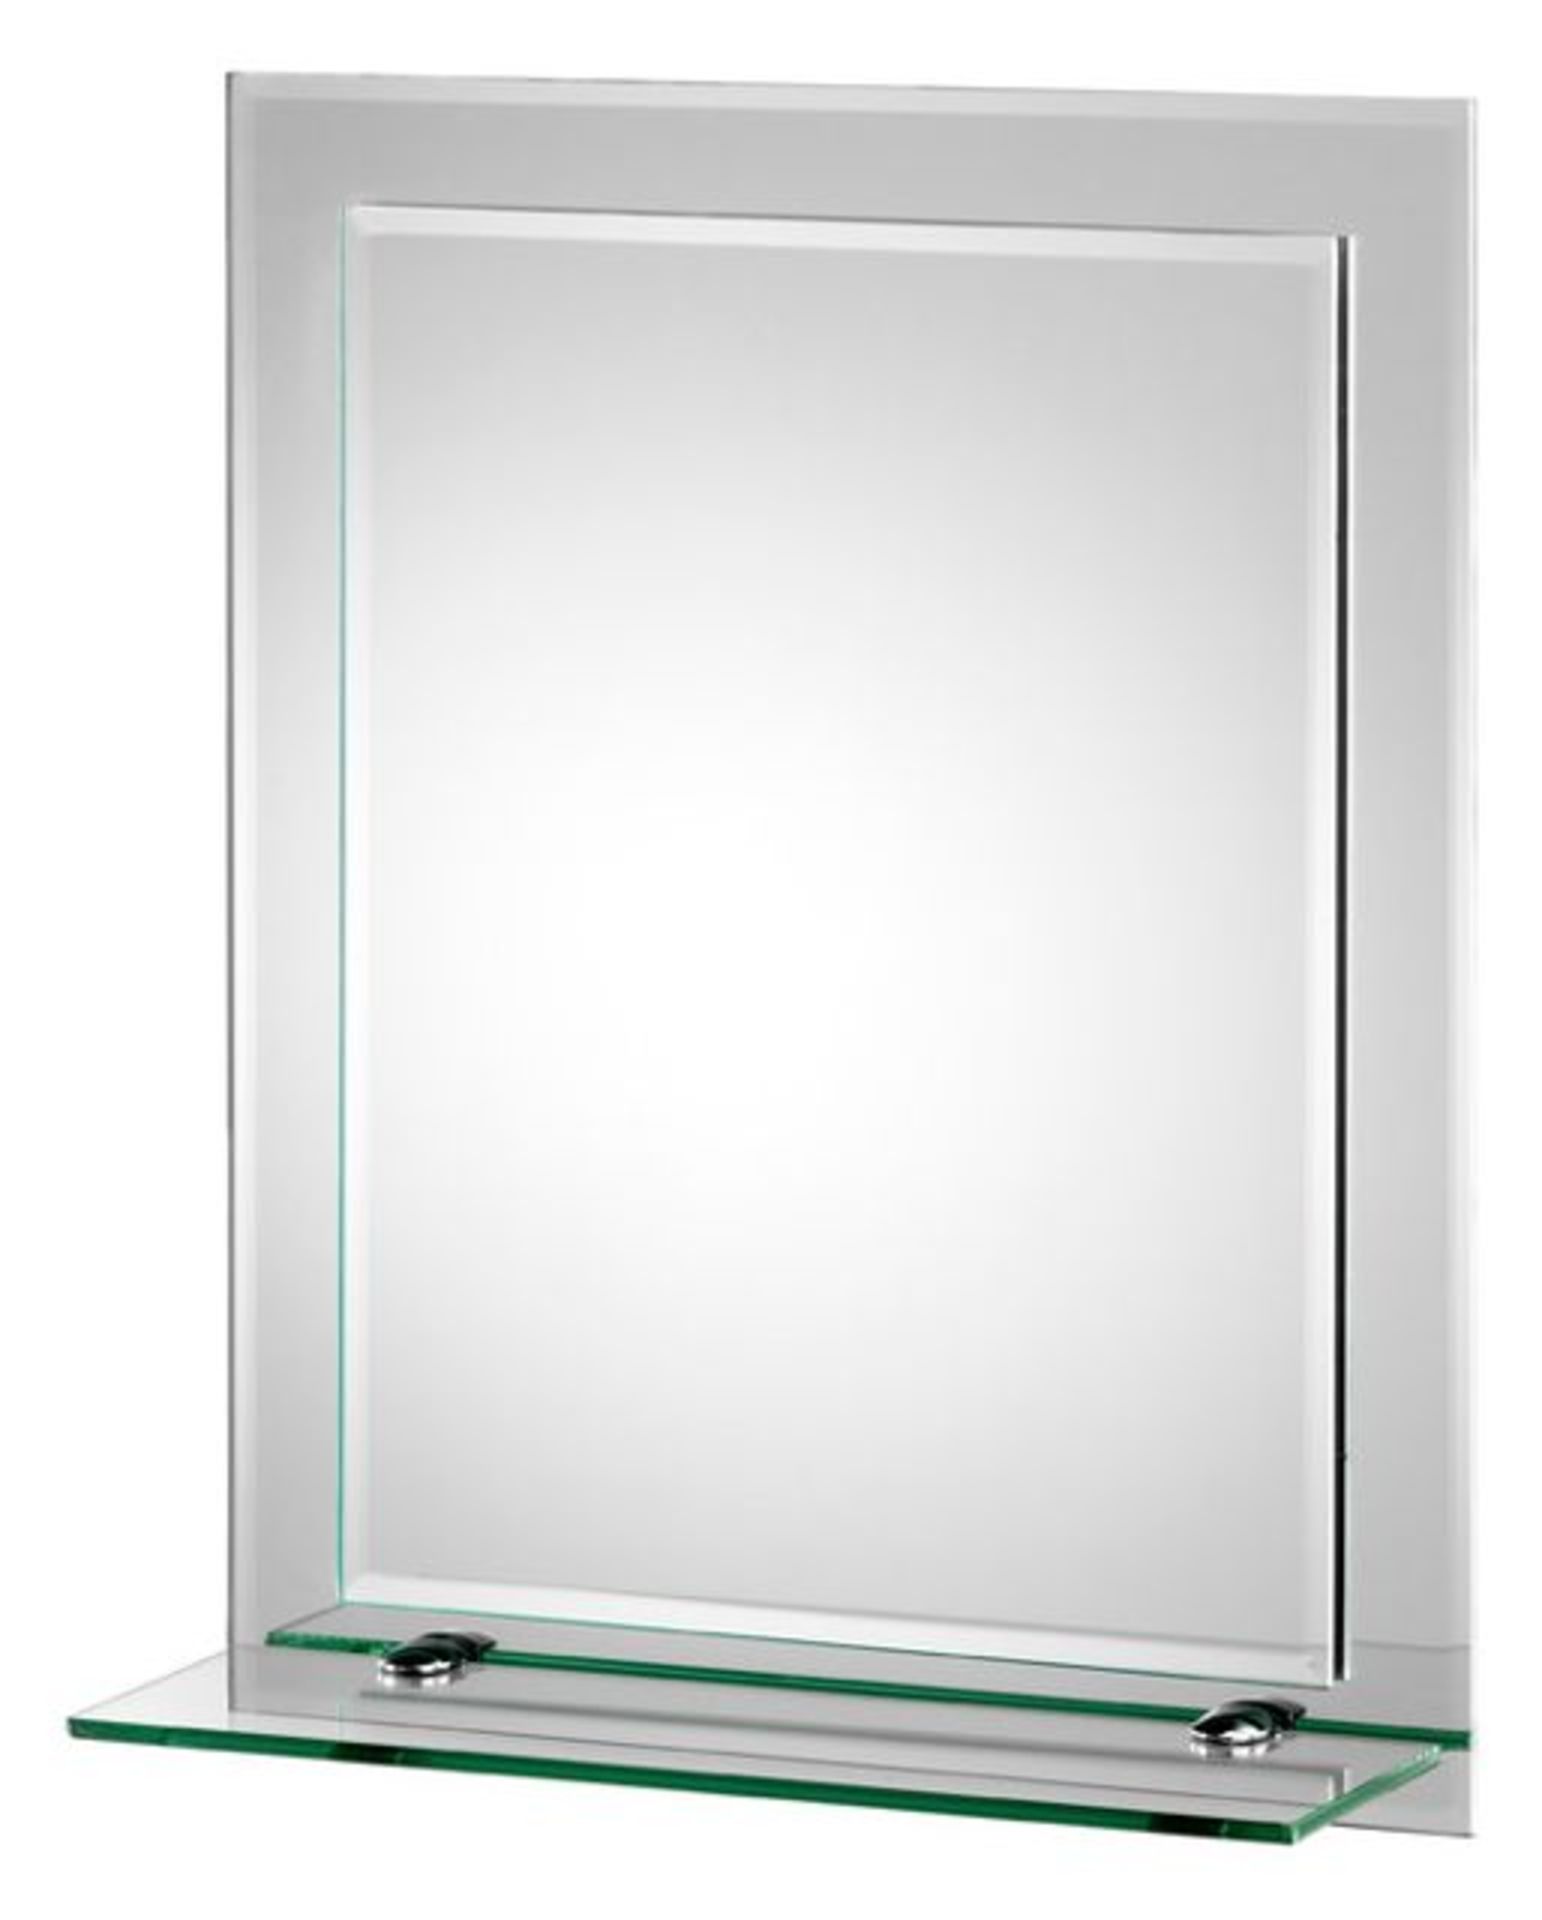 1 GRADE A / RRP £56.66 BOXED RYDAL RECTANGLE DOUBLE LAYER BATHROOM MIRROR WITH SHELF (50x40cm)